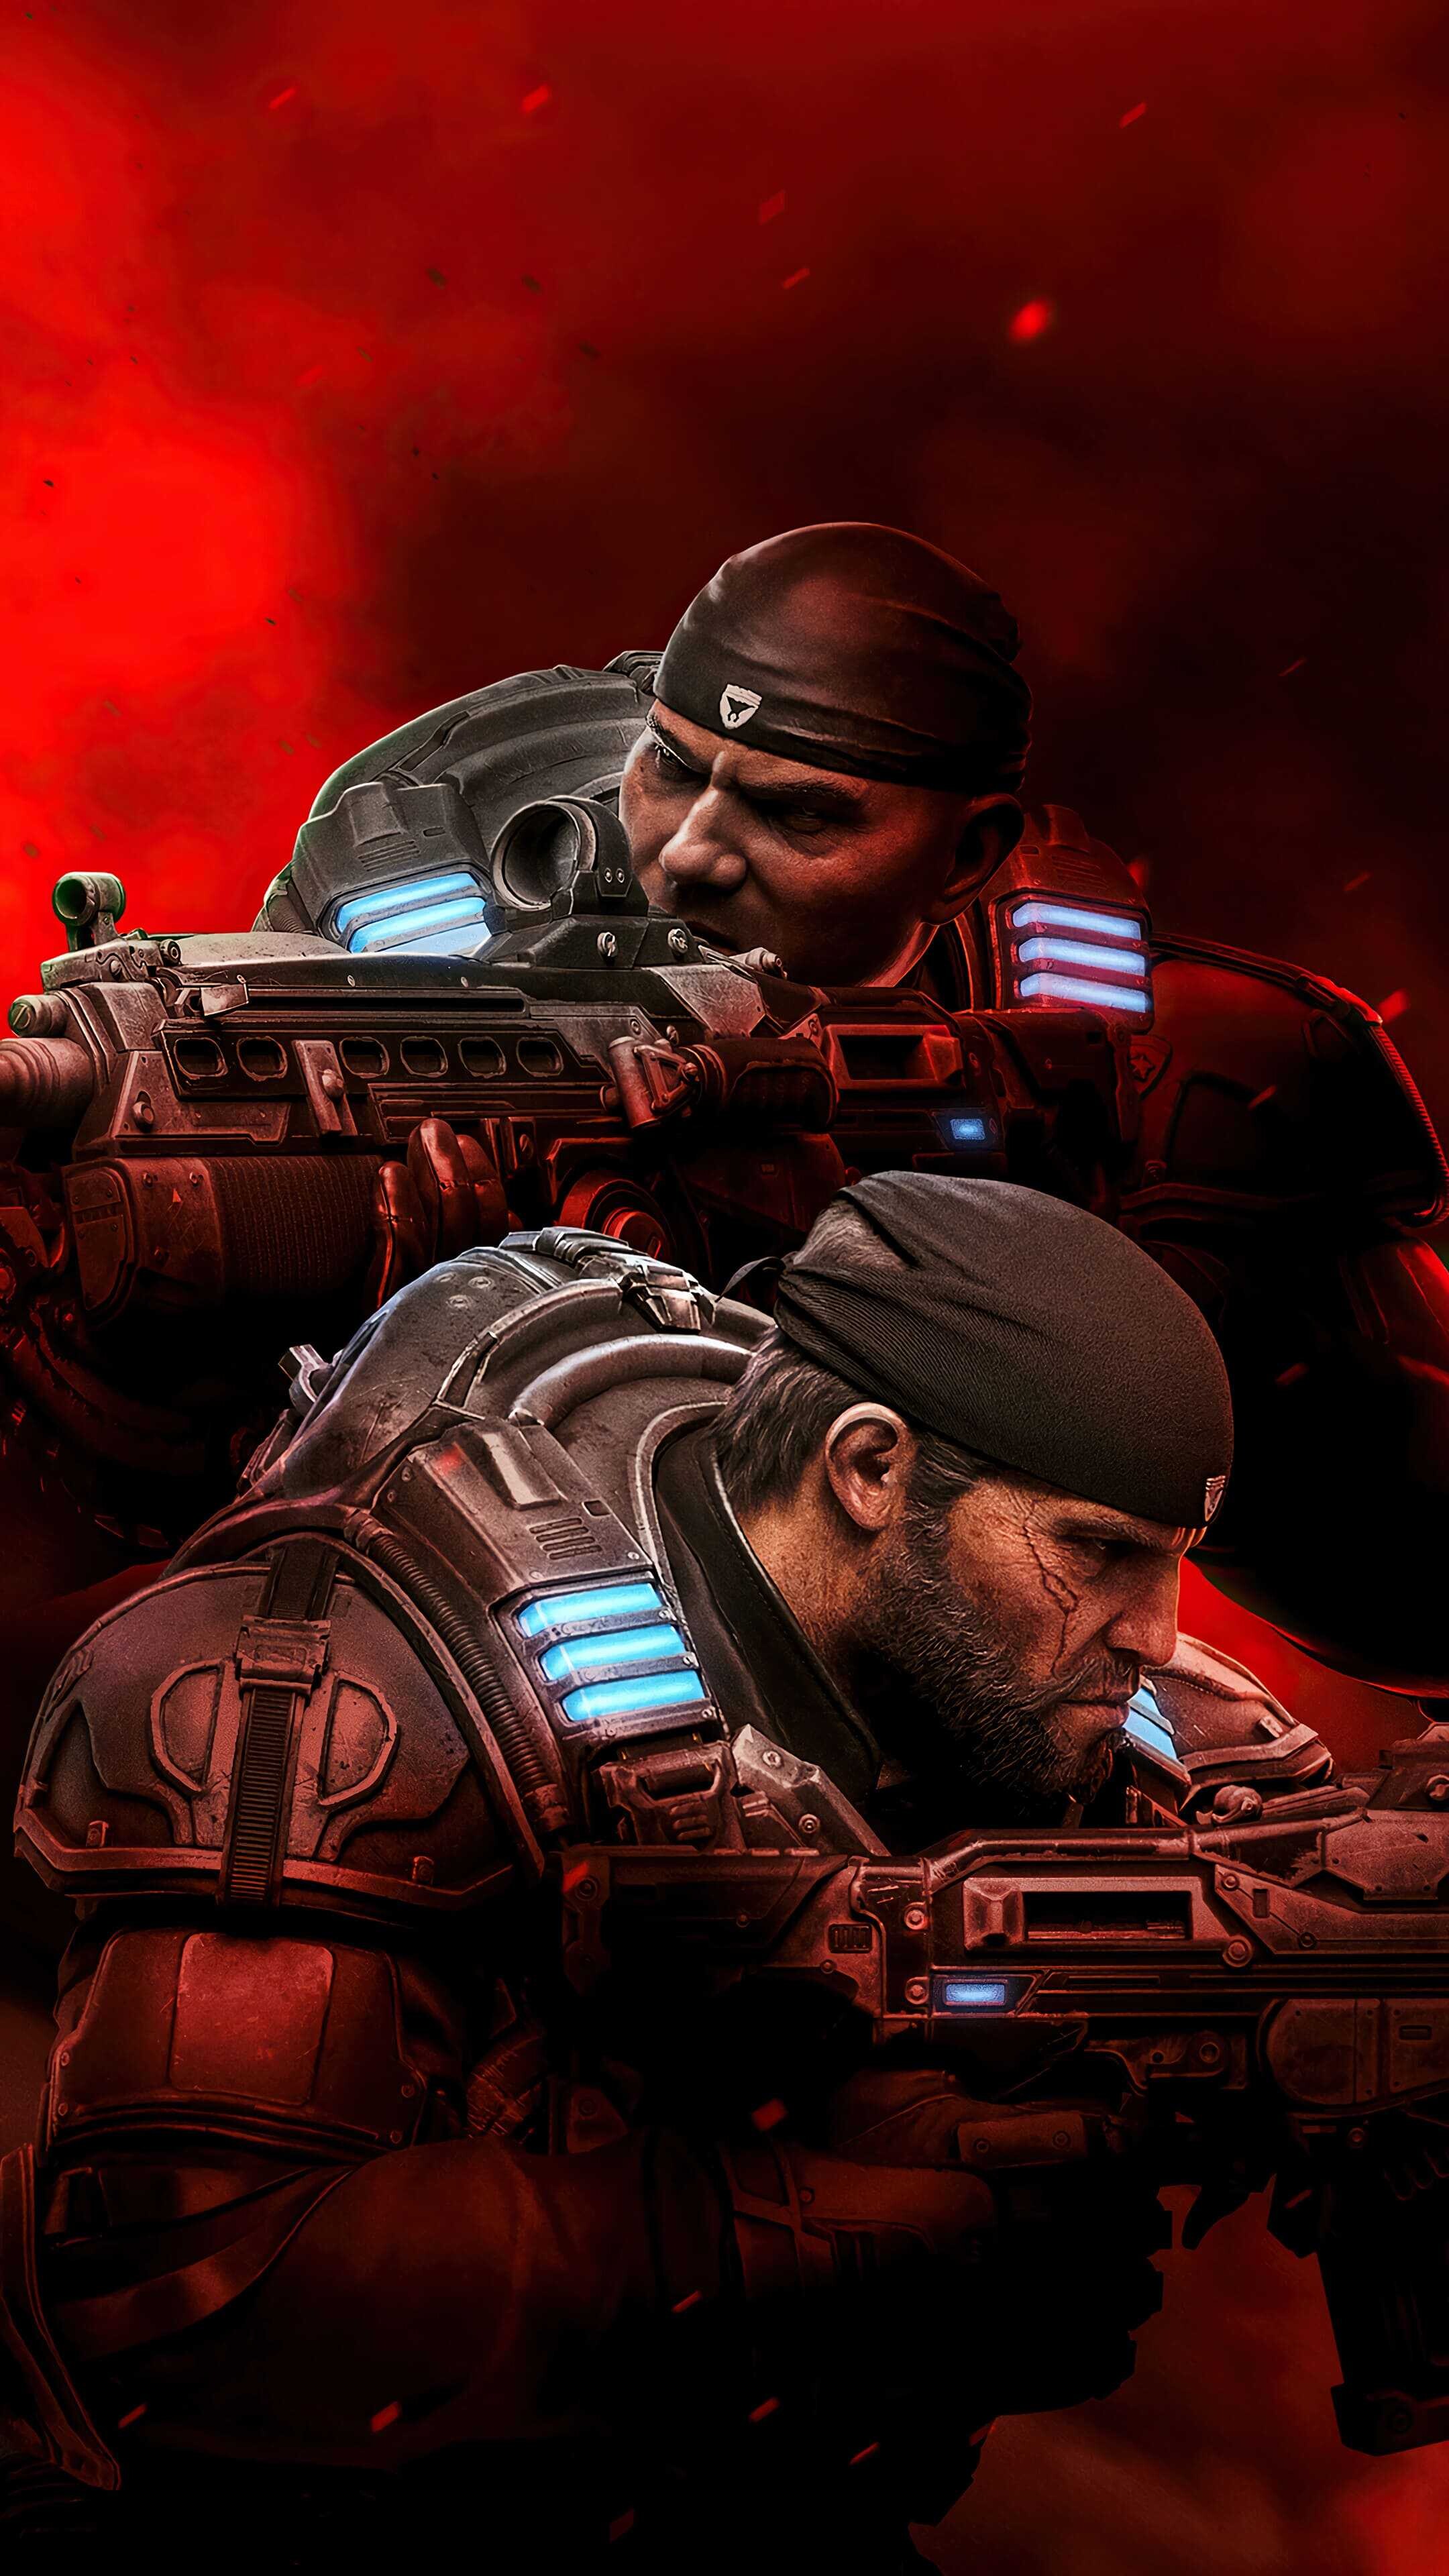 Gears of War: Coalition of Ordered Governments Army, Alpha Squad, Delta-One, Locust War. 2160x3840 4K Background.